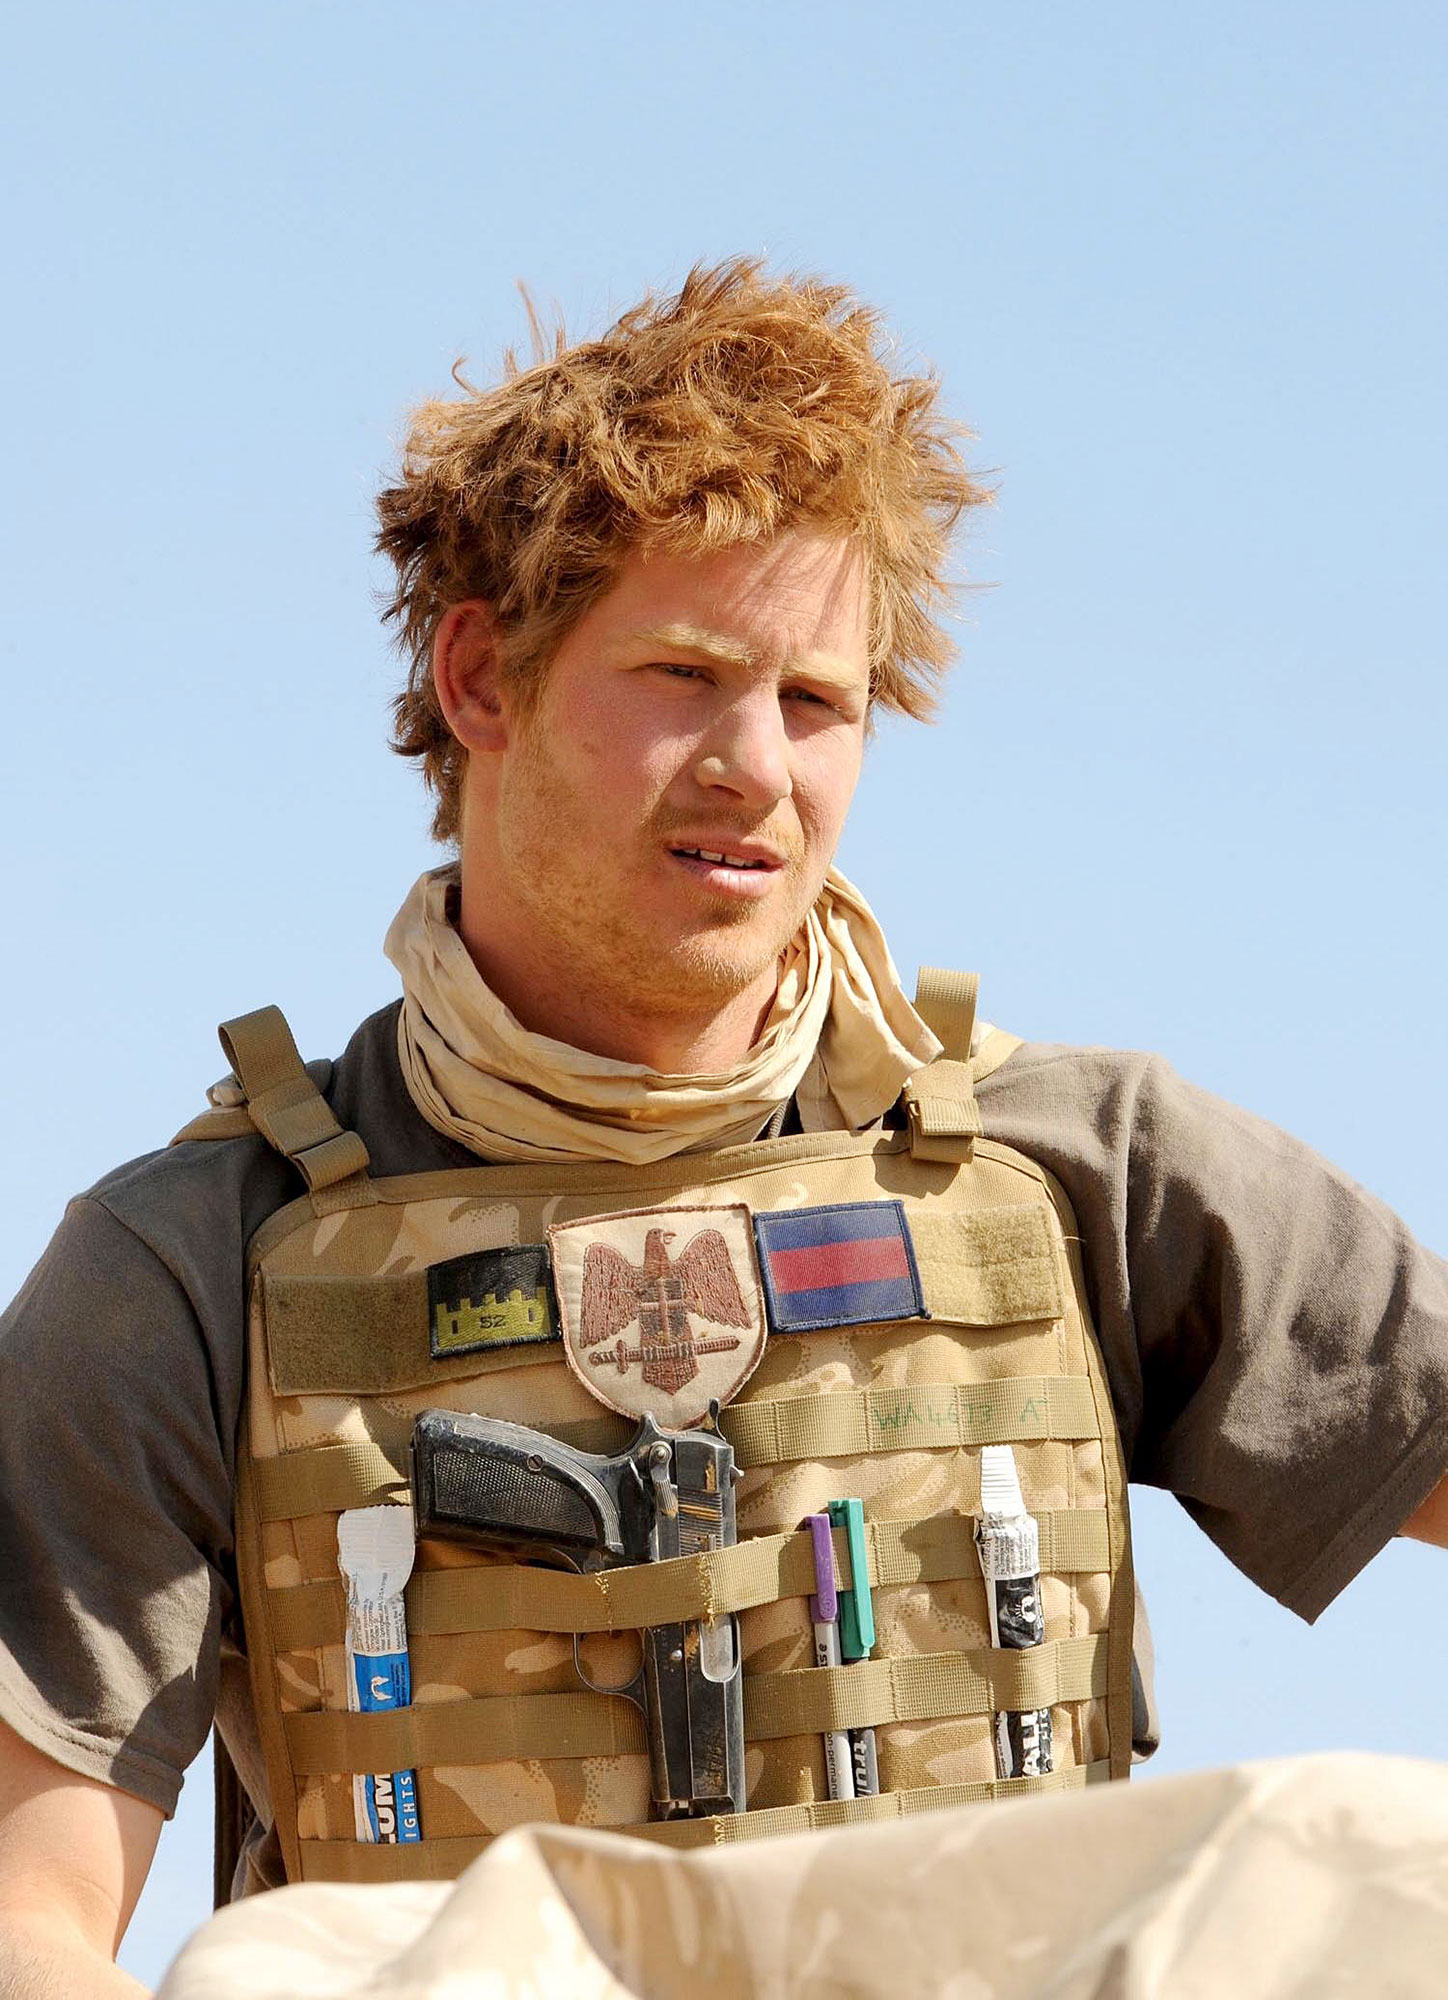 Prince Harry's Military Career: From Enlistment to Invictus Games